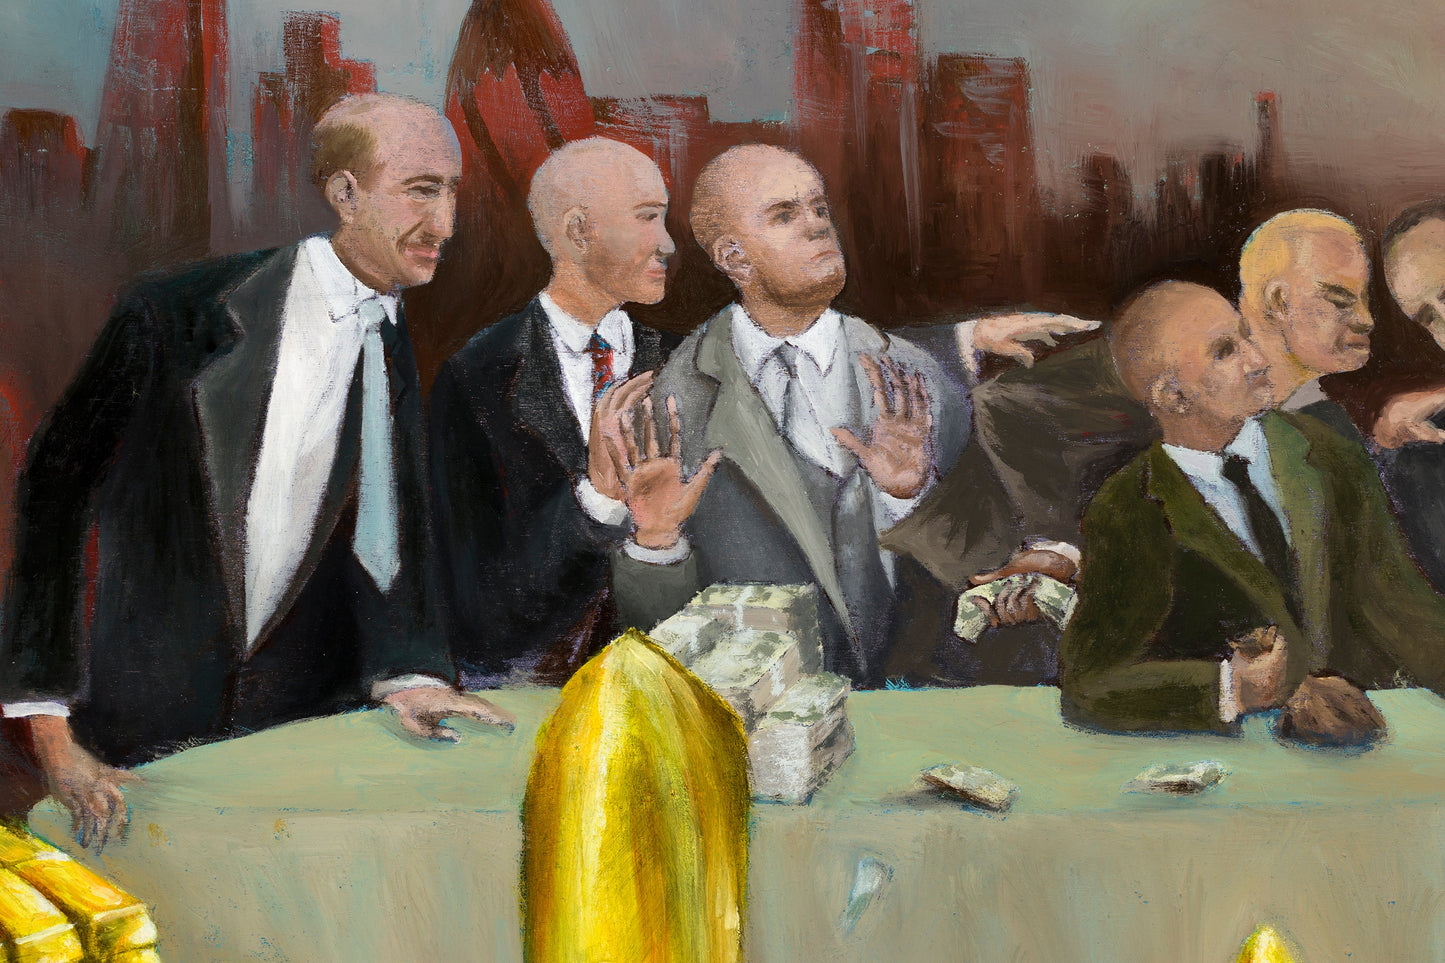 The Last Supper on Wall Street